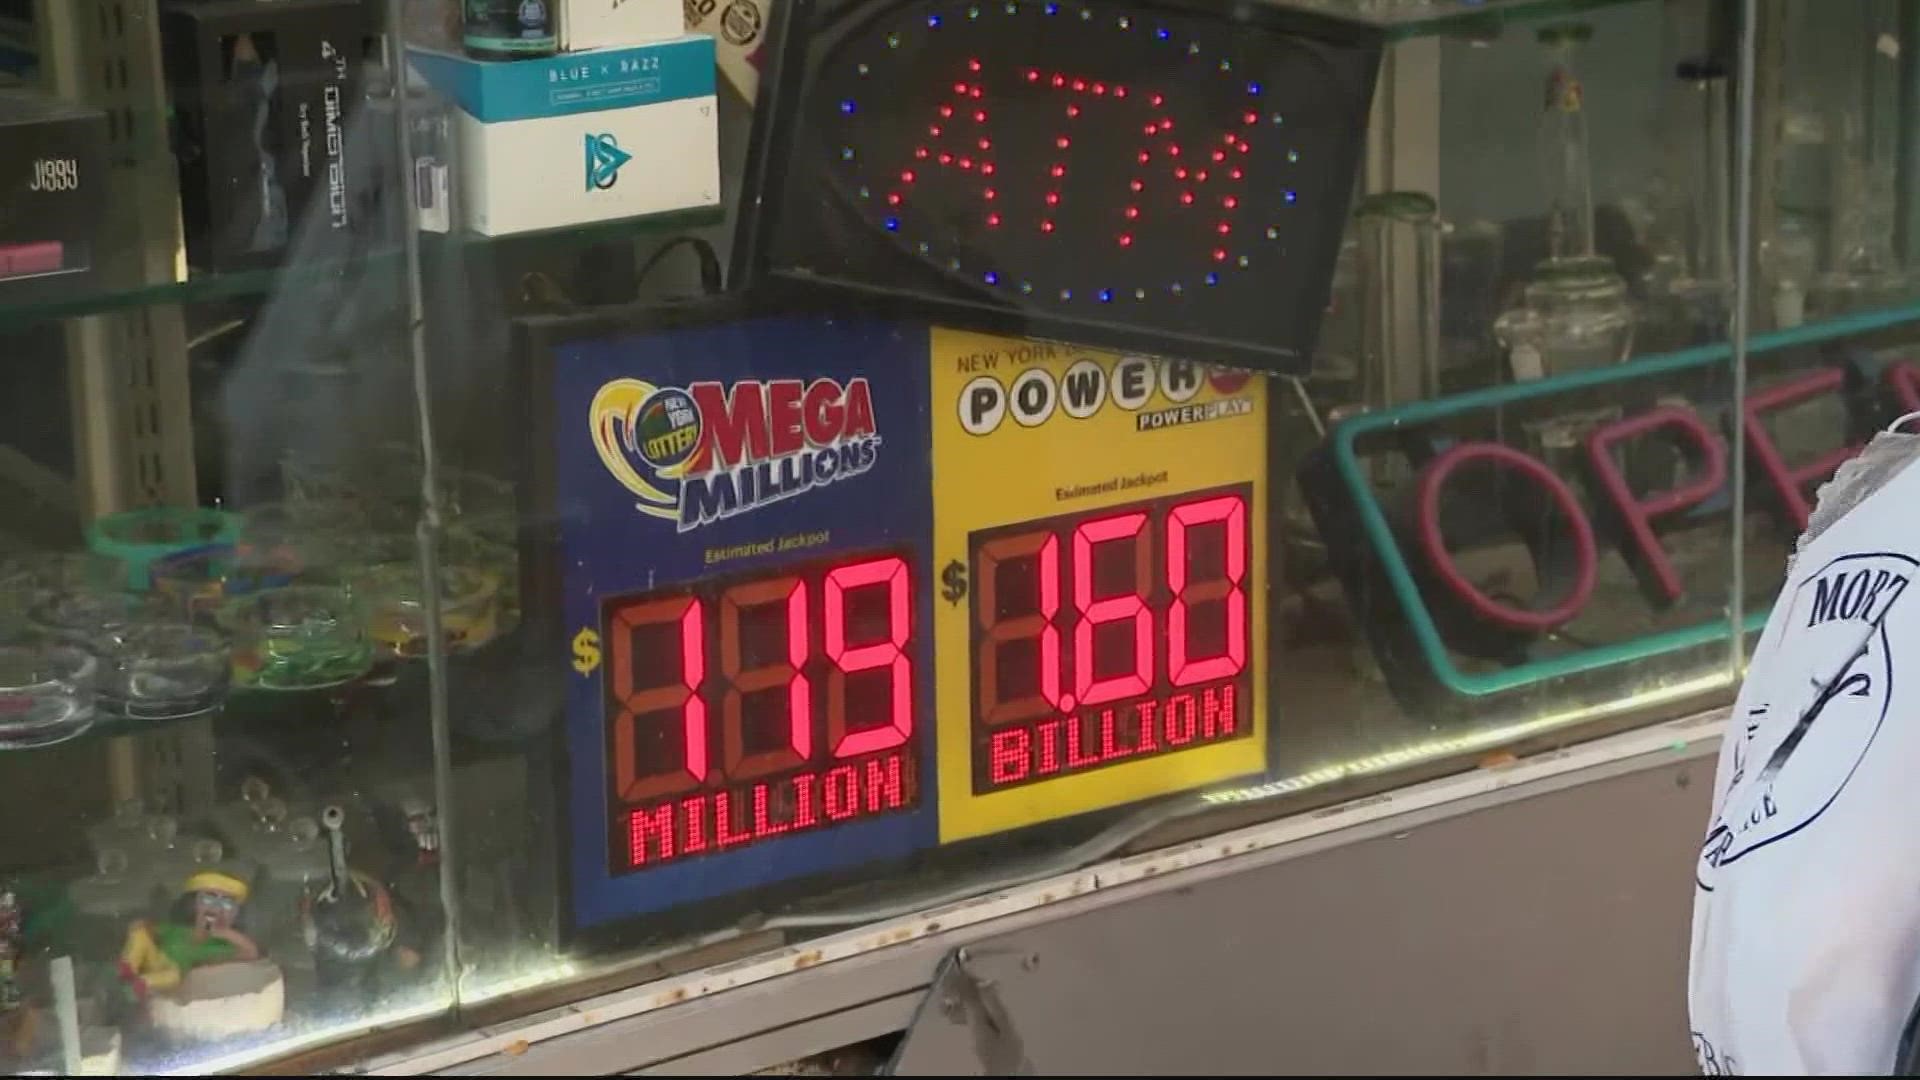 Monday's Powerball drawing for the largest-ever jackpot was delayed because of a technical issue, the lottery game said during the live broadcast.